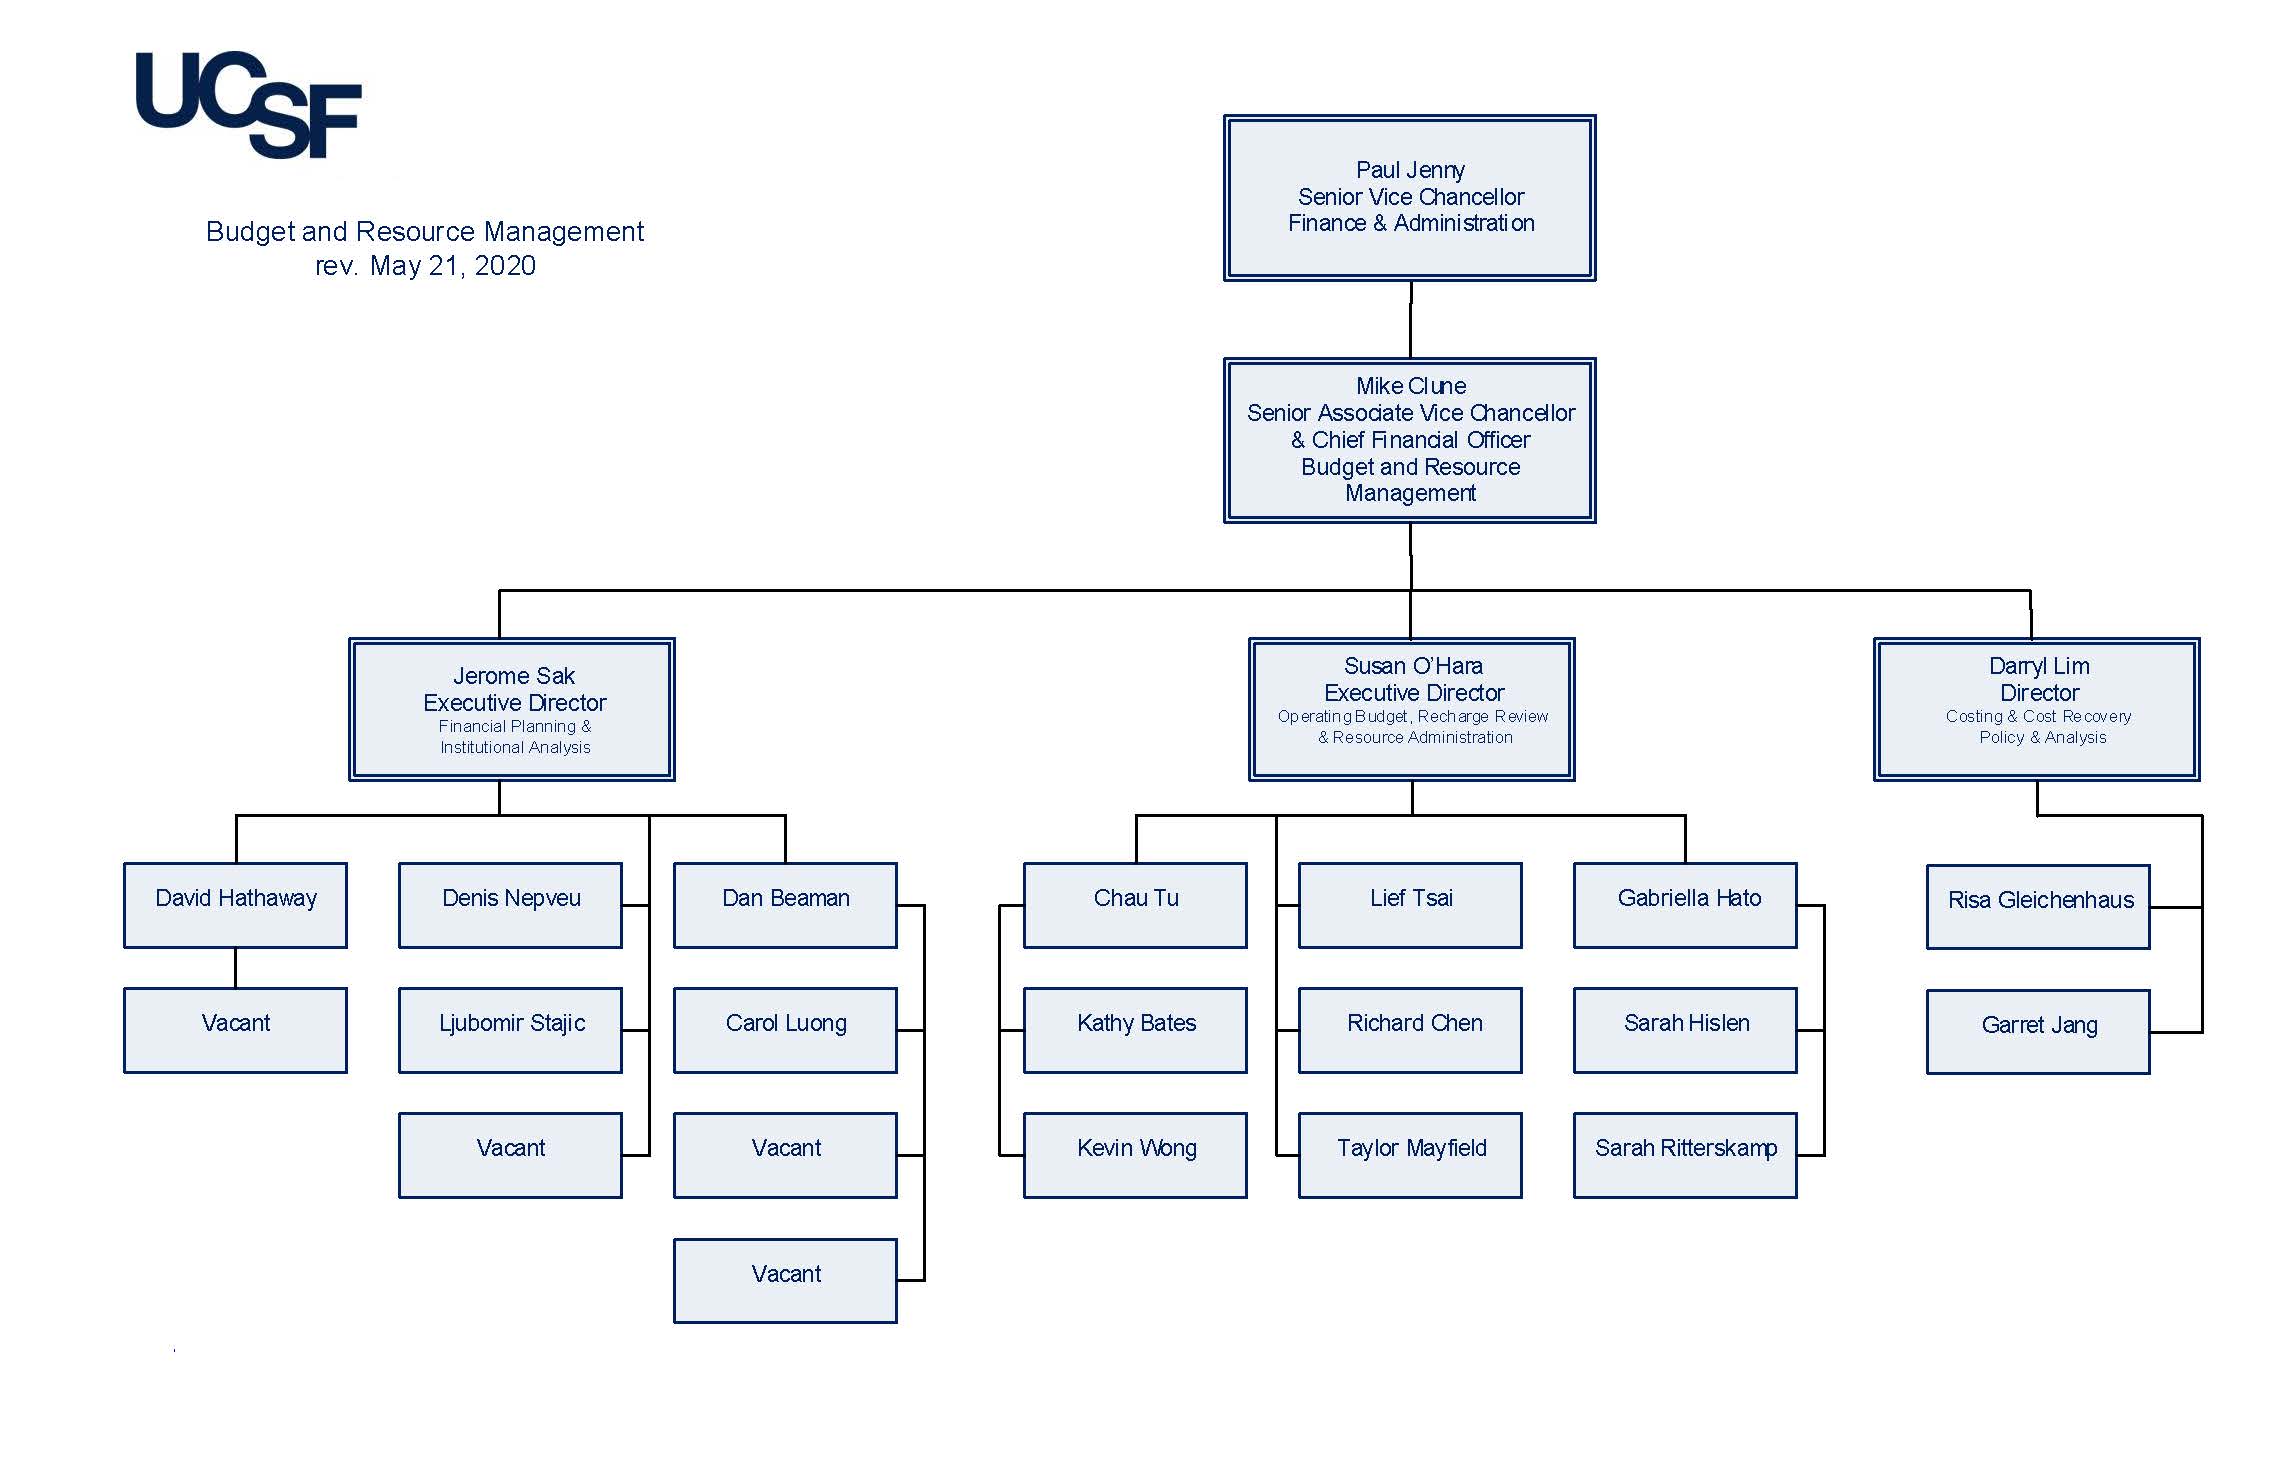 Organization chart for the UCSF Budget office.